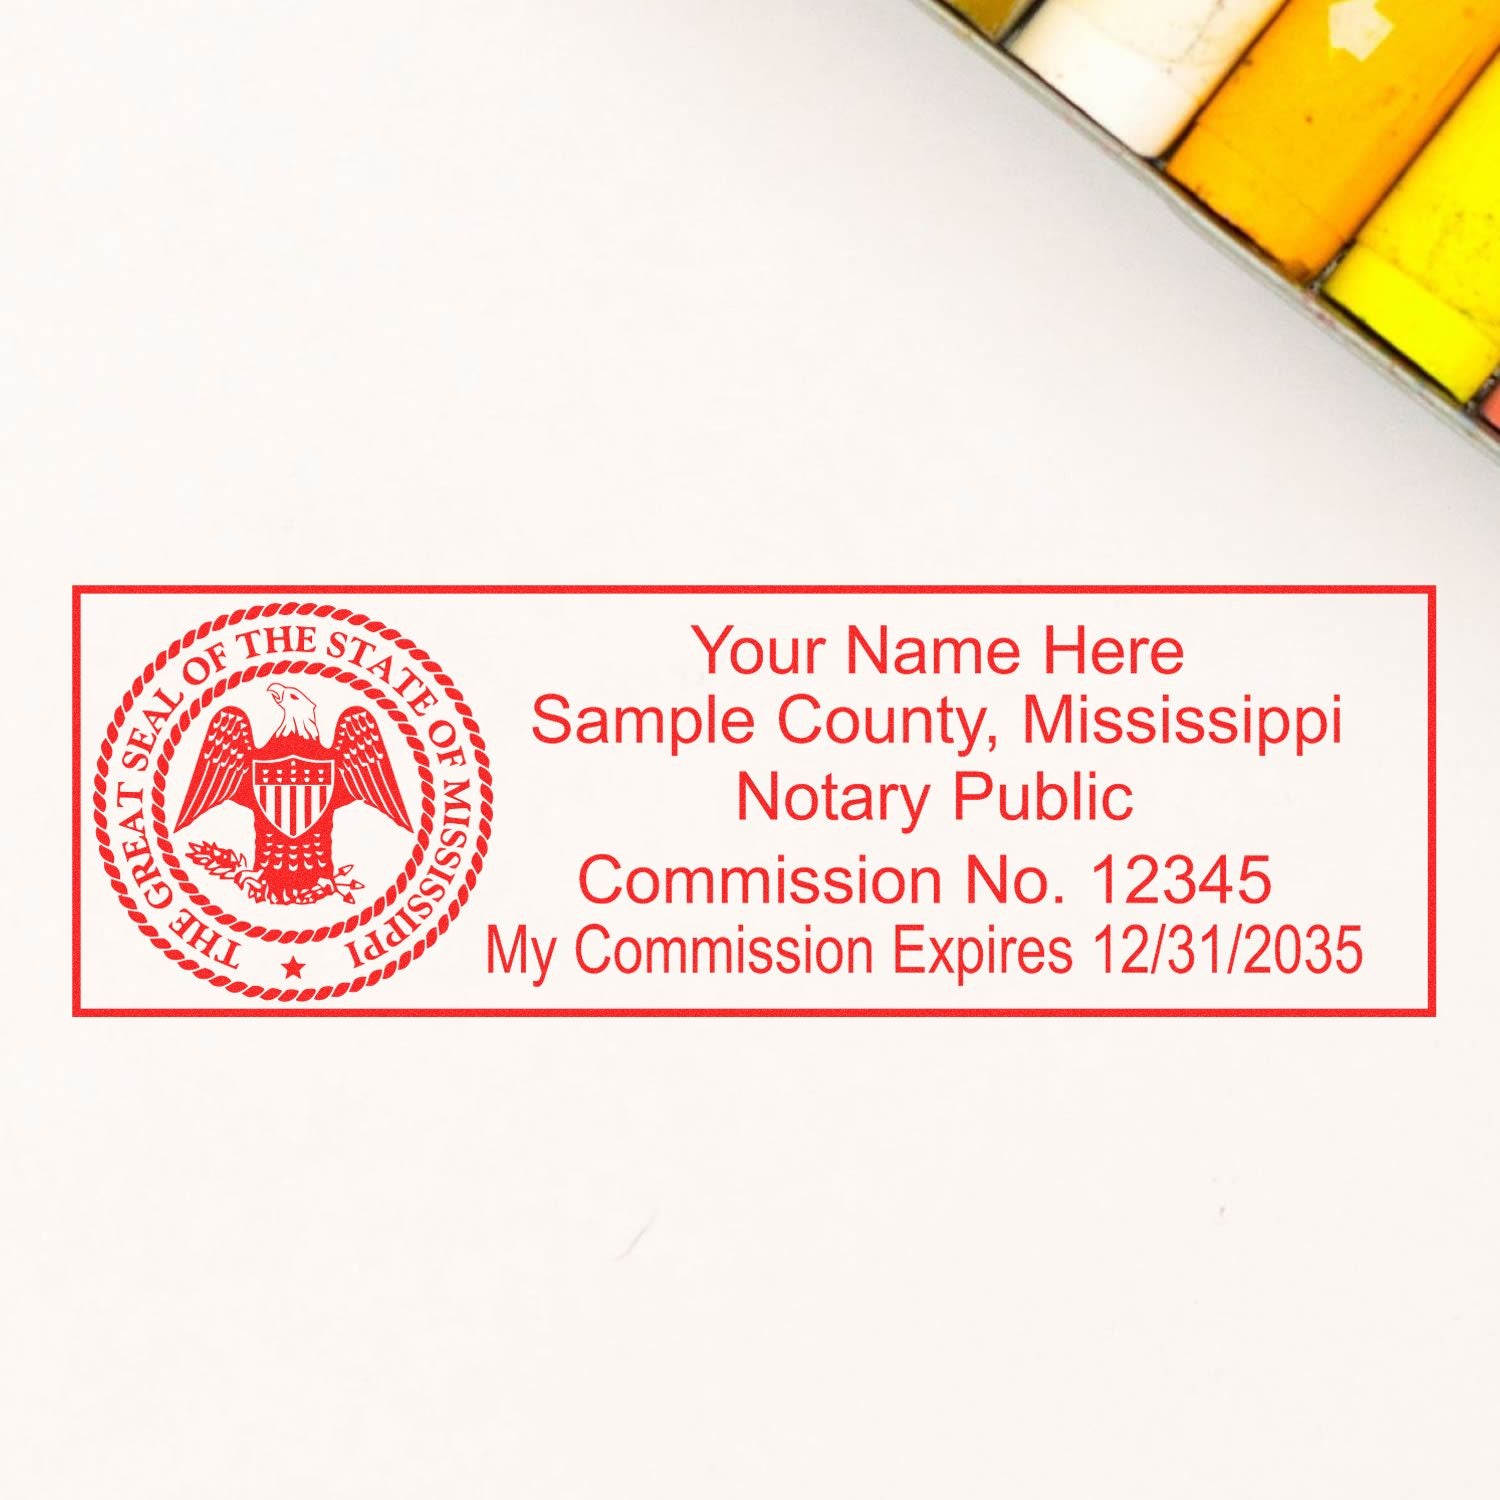 The main image for the PSI Mississippi Notary Stamp depicting a sample of the imprint and electronic files